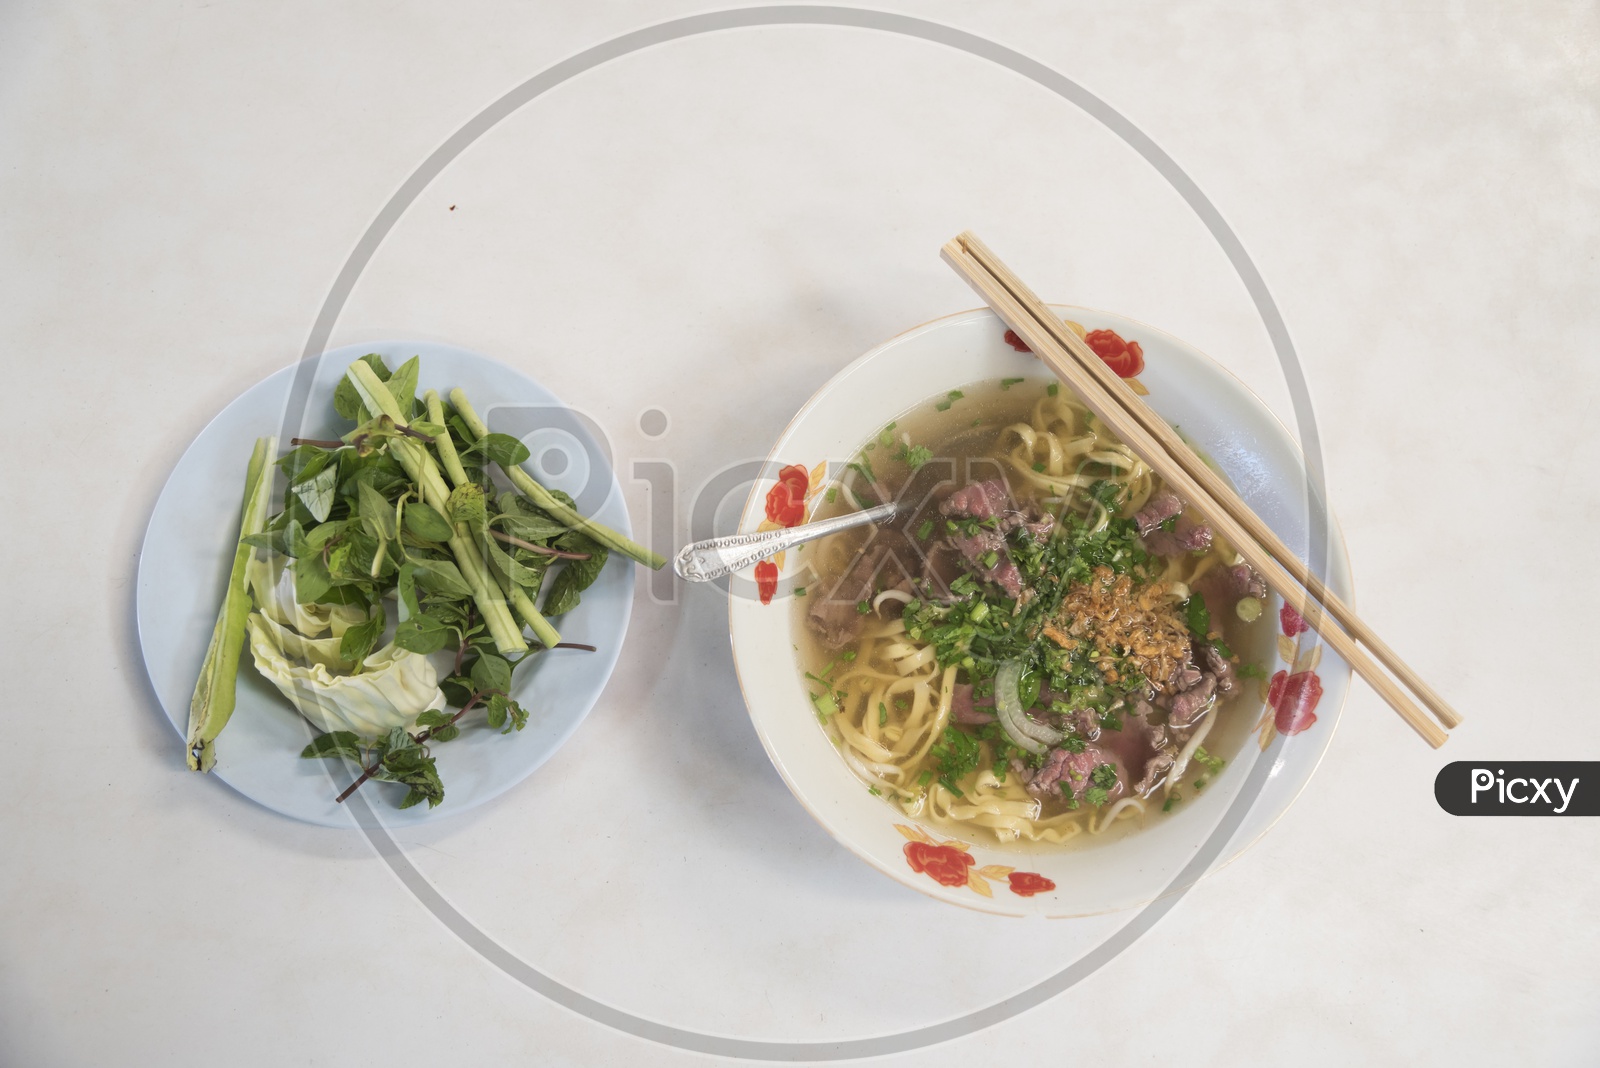 Pho Bo - Vietnamese fresh rice noodle soup with beef, herbs and chili